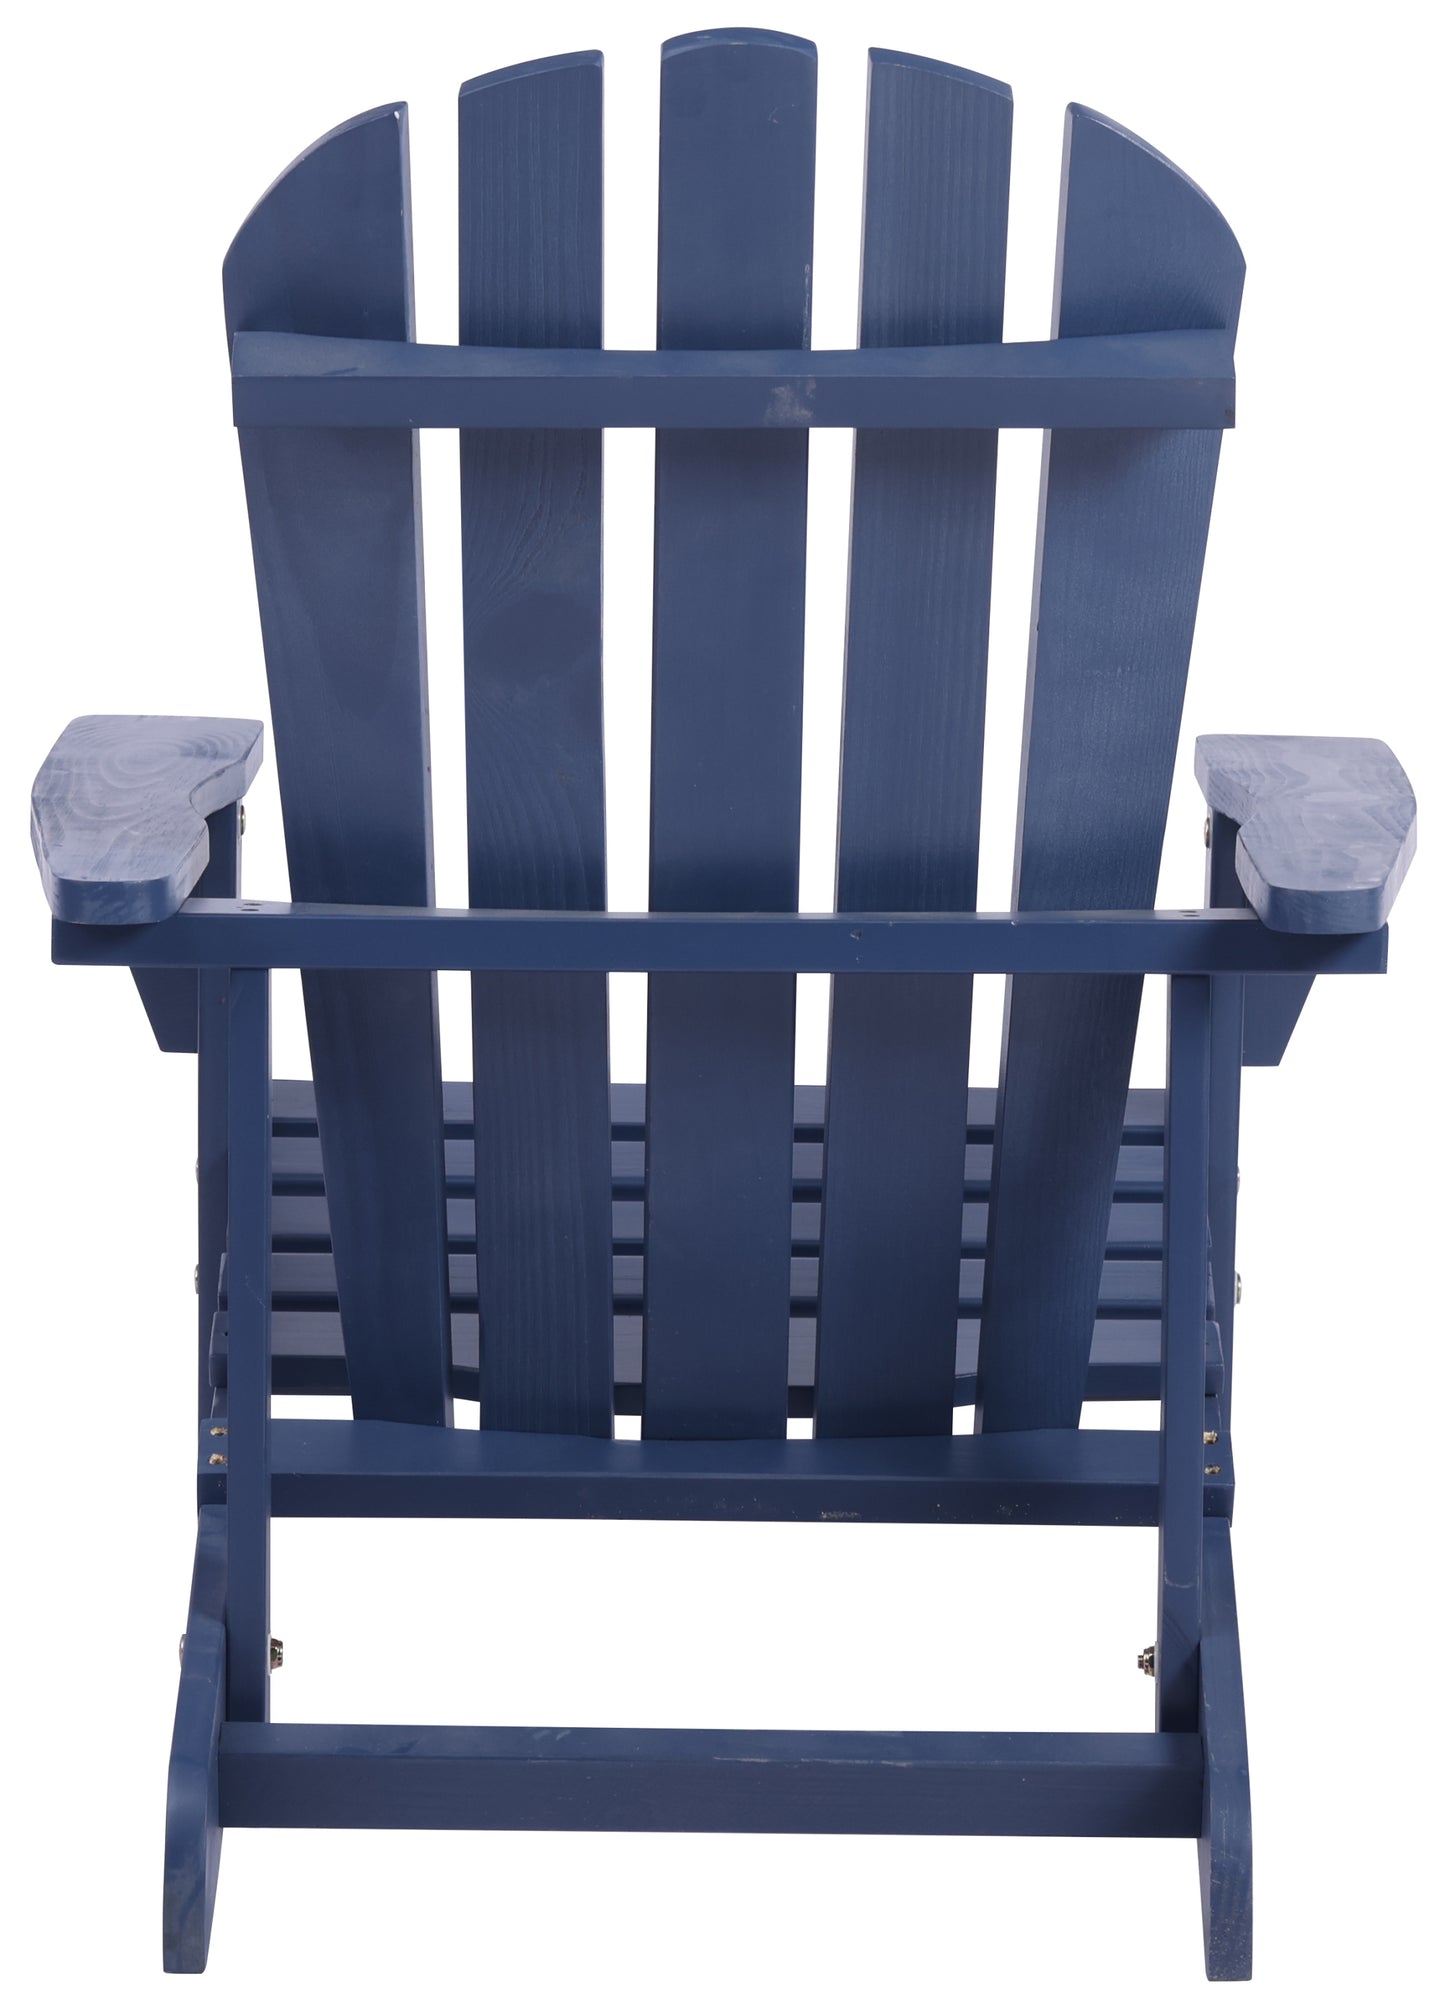 Adirondack Chair Solid Wood Outdoor Patio Furniture for Backyard, Garden, Lawn, Porch -Navy Blue